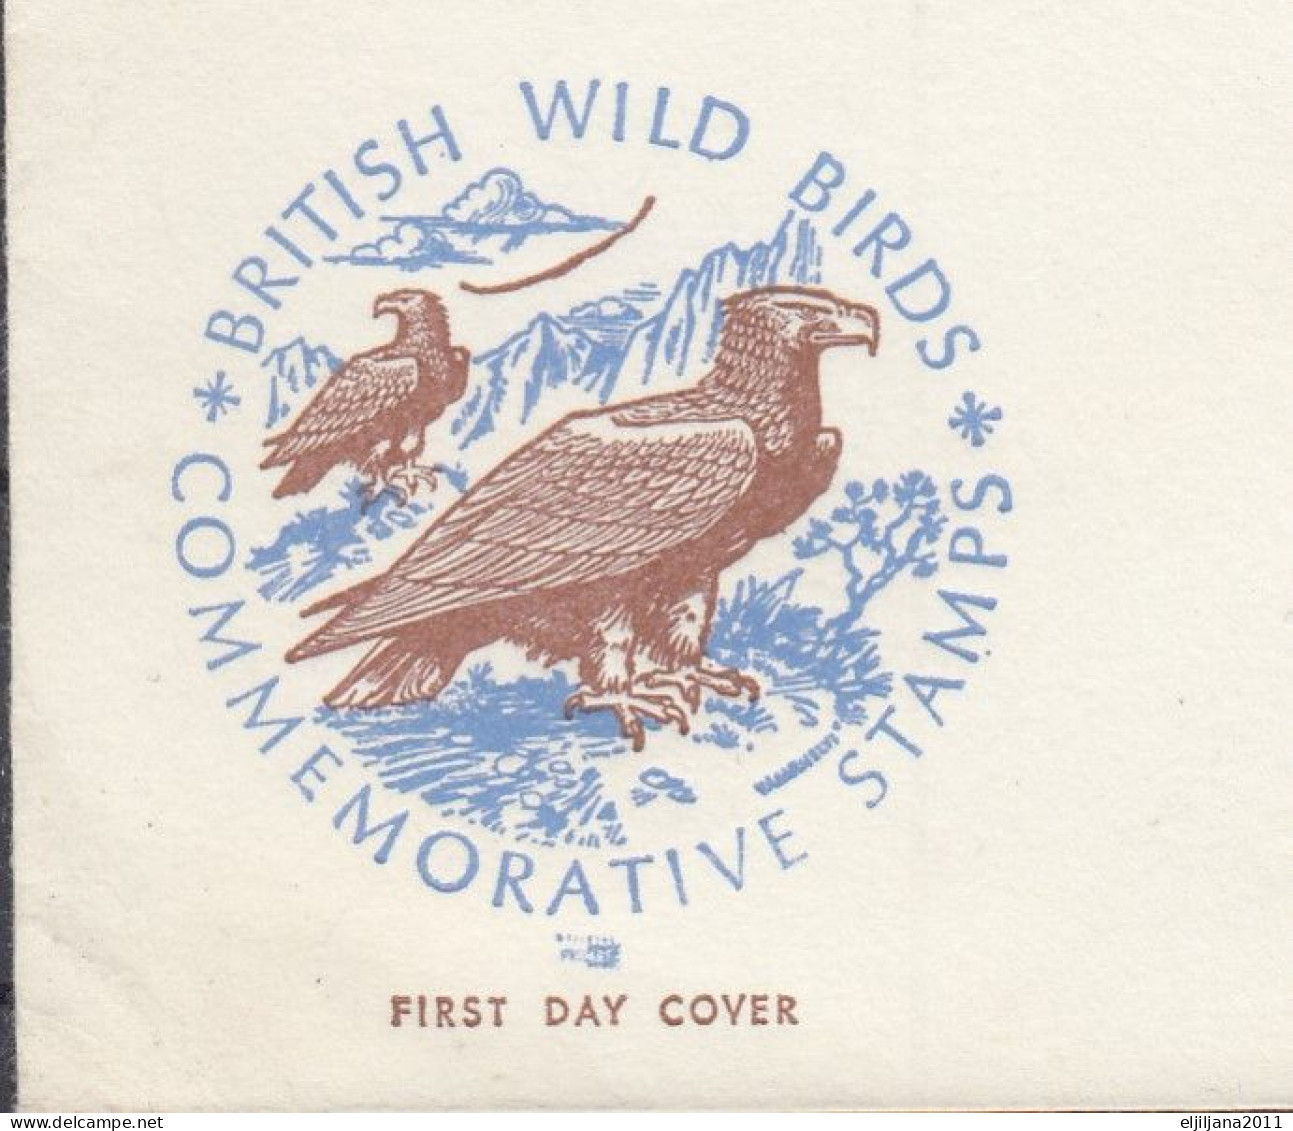 ⁕ GB 1967 QEII 3d ⁕ British Wild Birds ⁕ London FDC Commemorative Cover - See Scan - 1952-1971 Pre-Decimal Issues